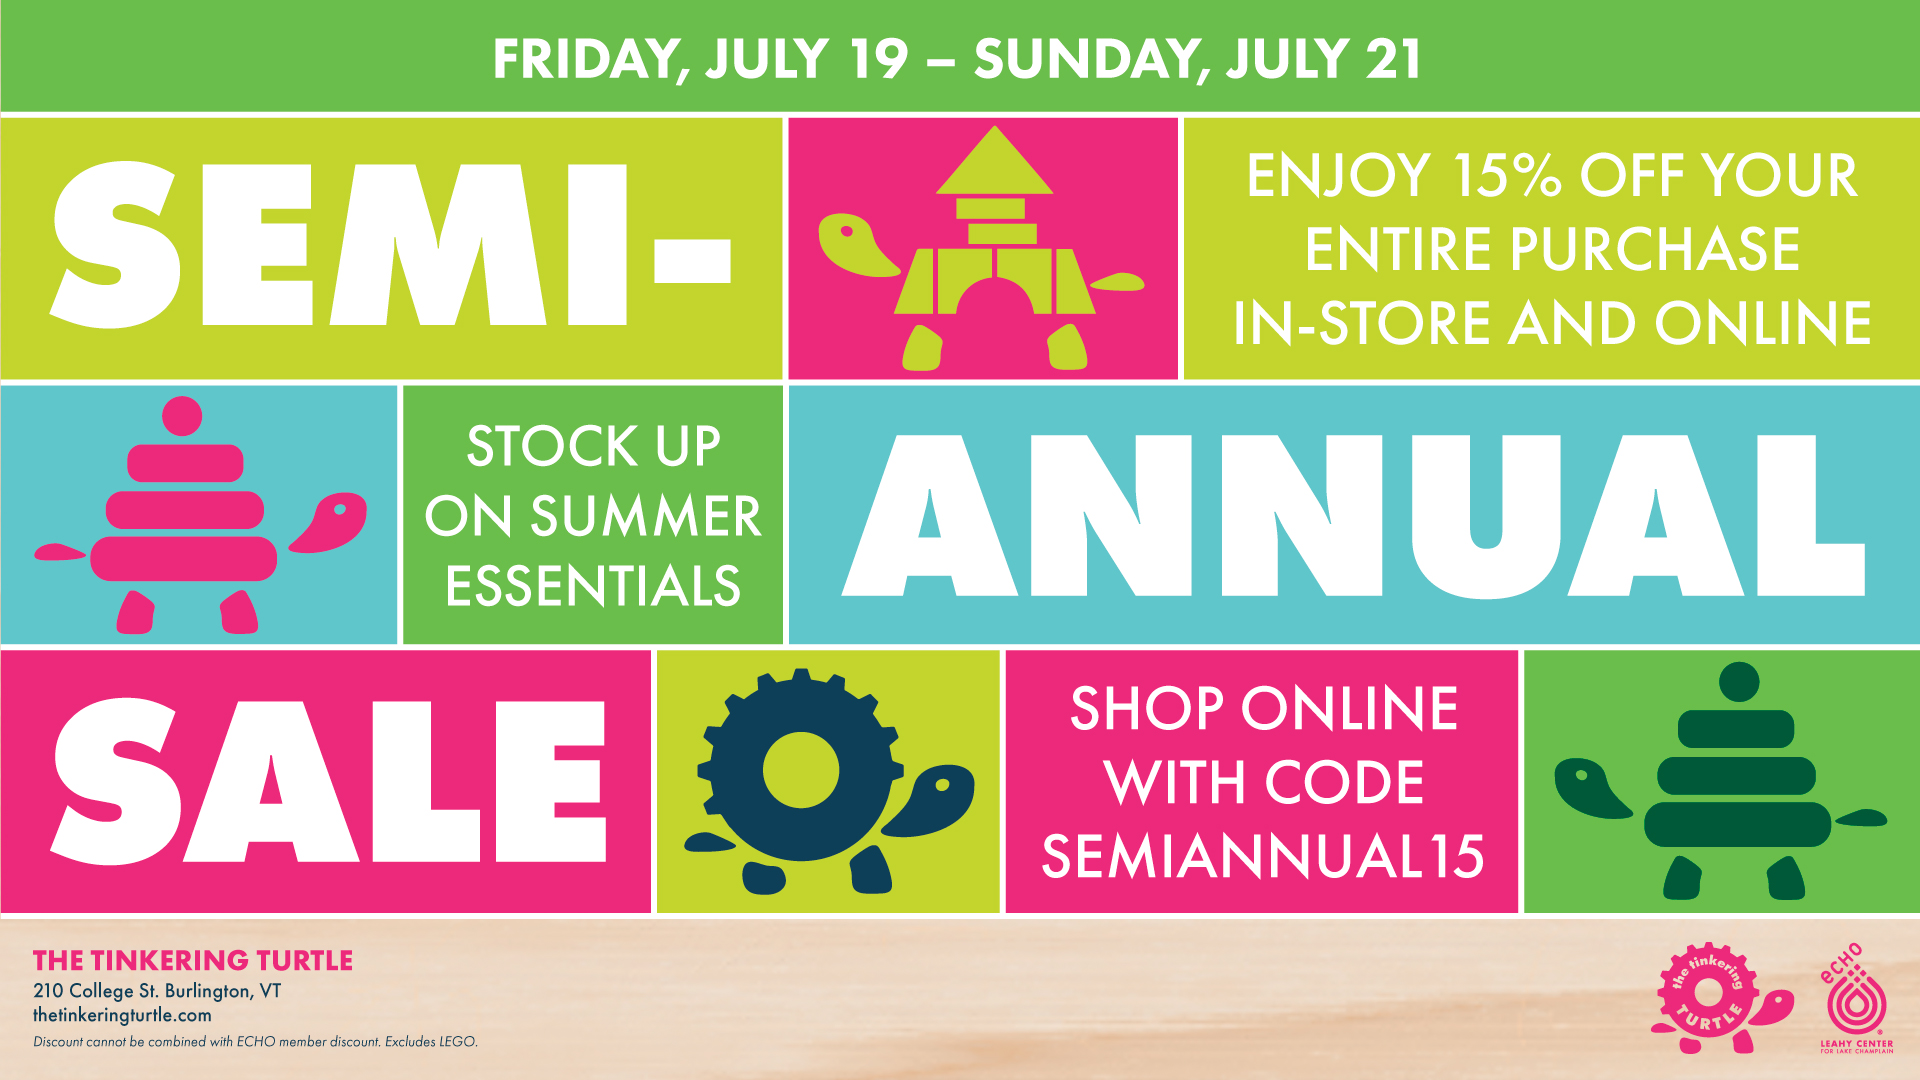 Graphic of stacked colorful blocks with text that reads "Friday, July 19 – Sunday, July 21. SEMI-ANNUAL SALE. Enjoy 15% off your entire purchase in-store and online. Stock up on summer essentials. Shop online with code SEMIANNUAL15. The Tinkering Turtle. Discount cannot be combined with ECHO member discount. Excludes Lego."